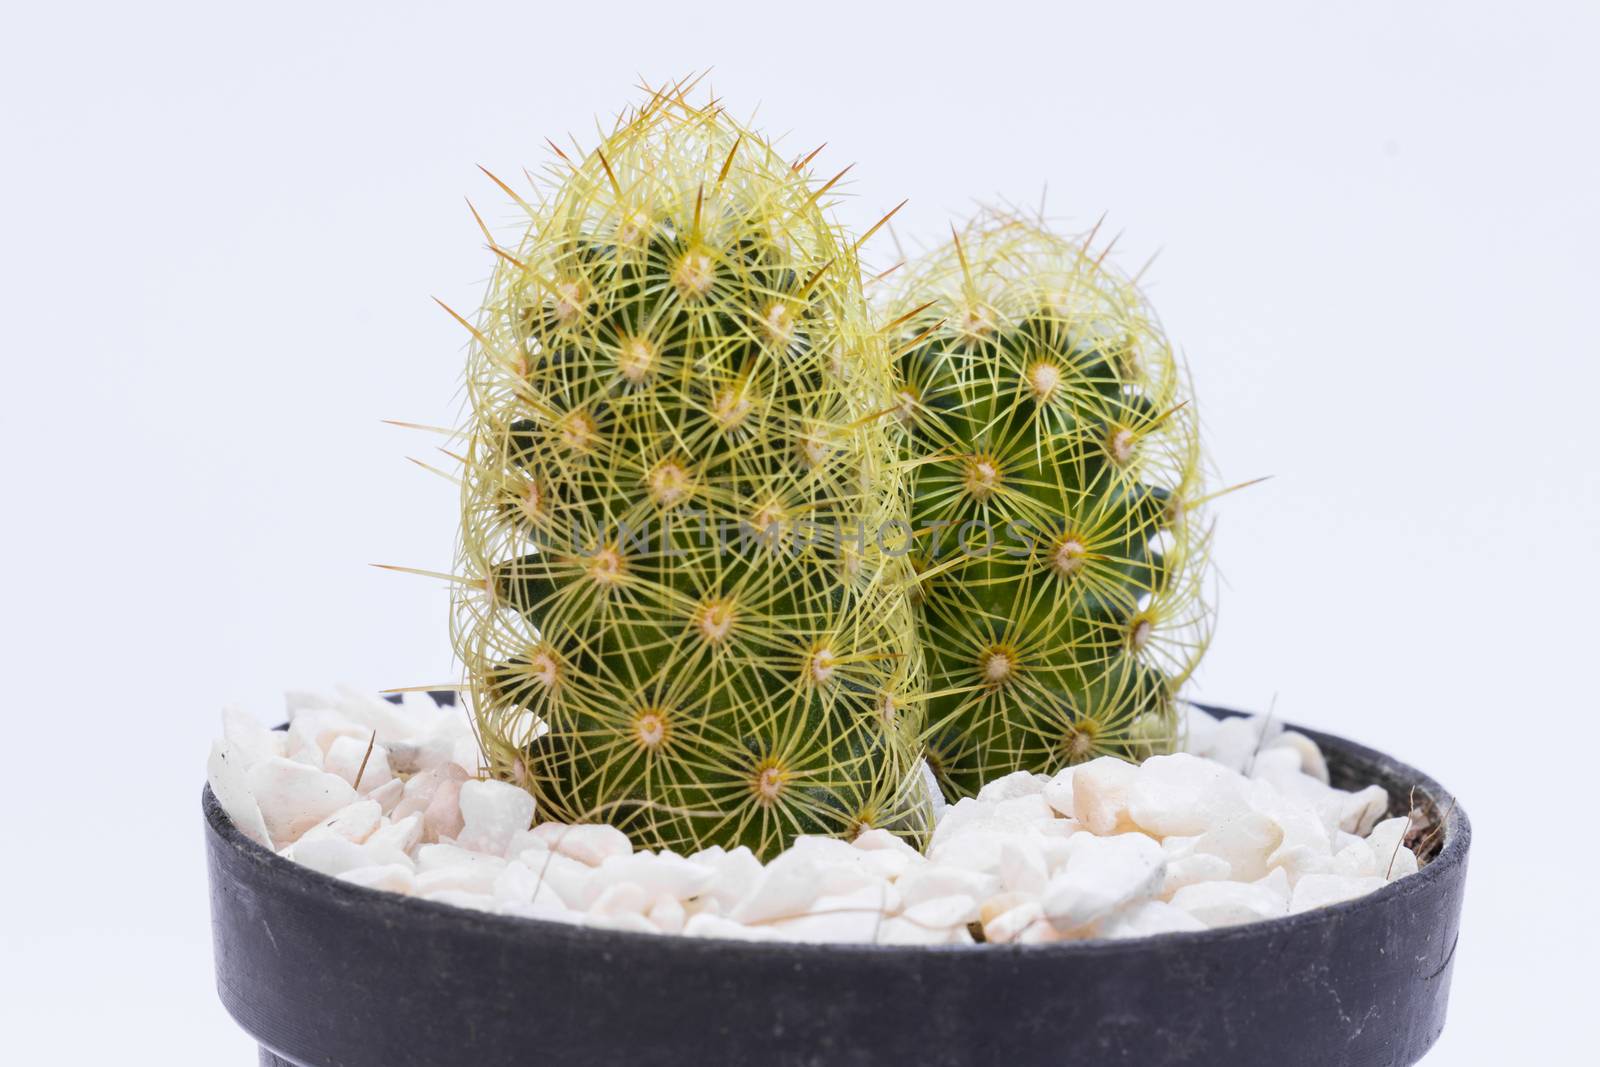 Small cactus in black plastic pot by chingraph